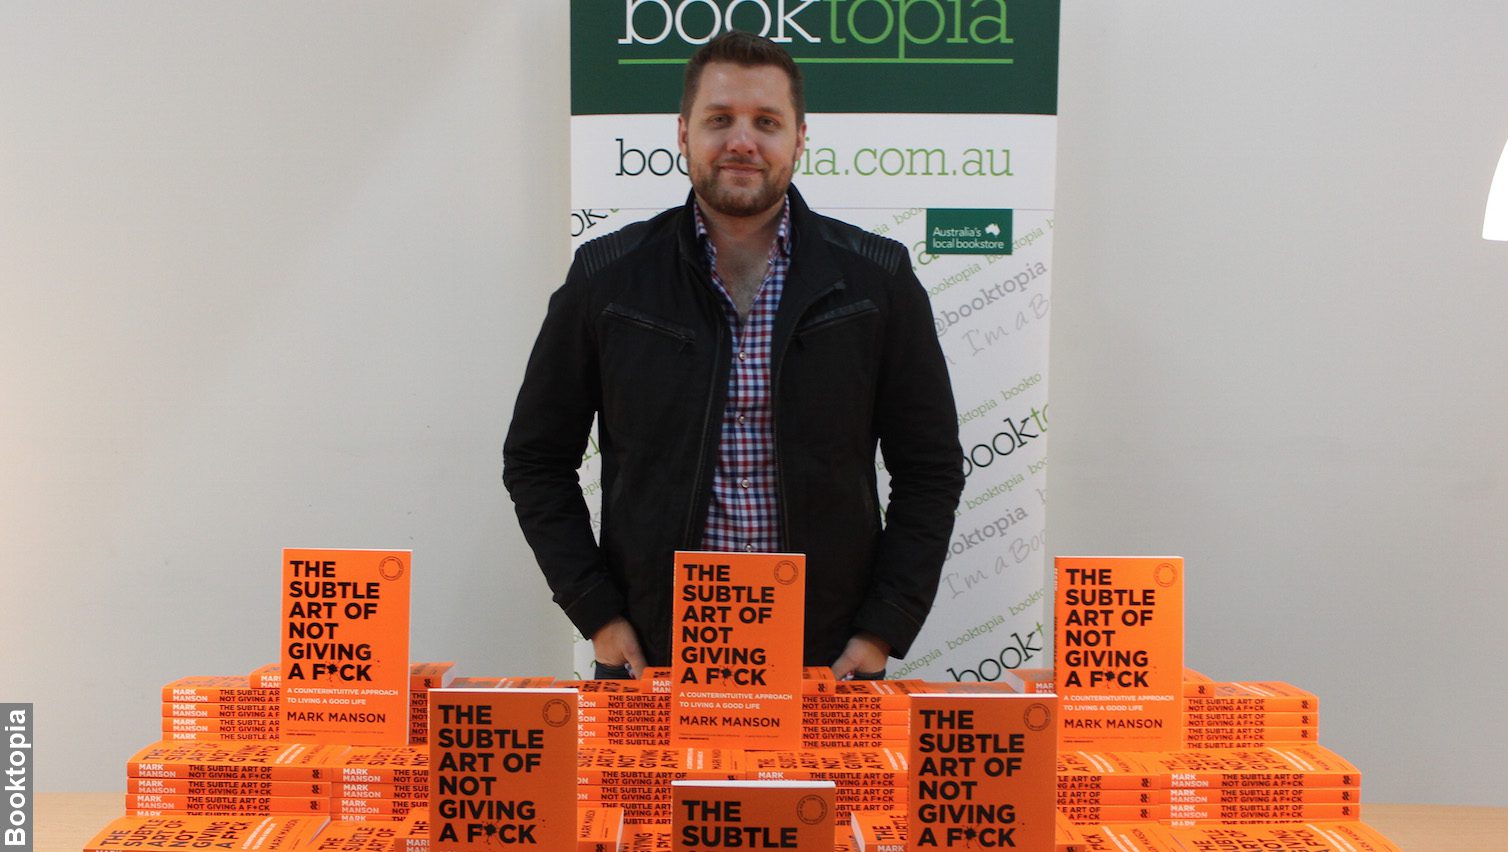 Mark Manson at book launch of The Subtle Art of Not Giving a F*ck at Booktopia, standing next to a lot of his books